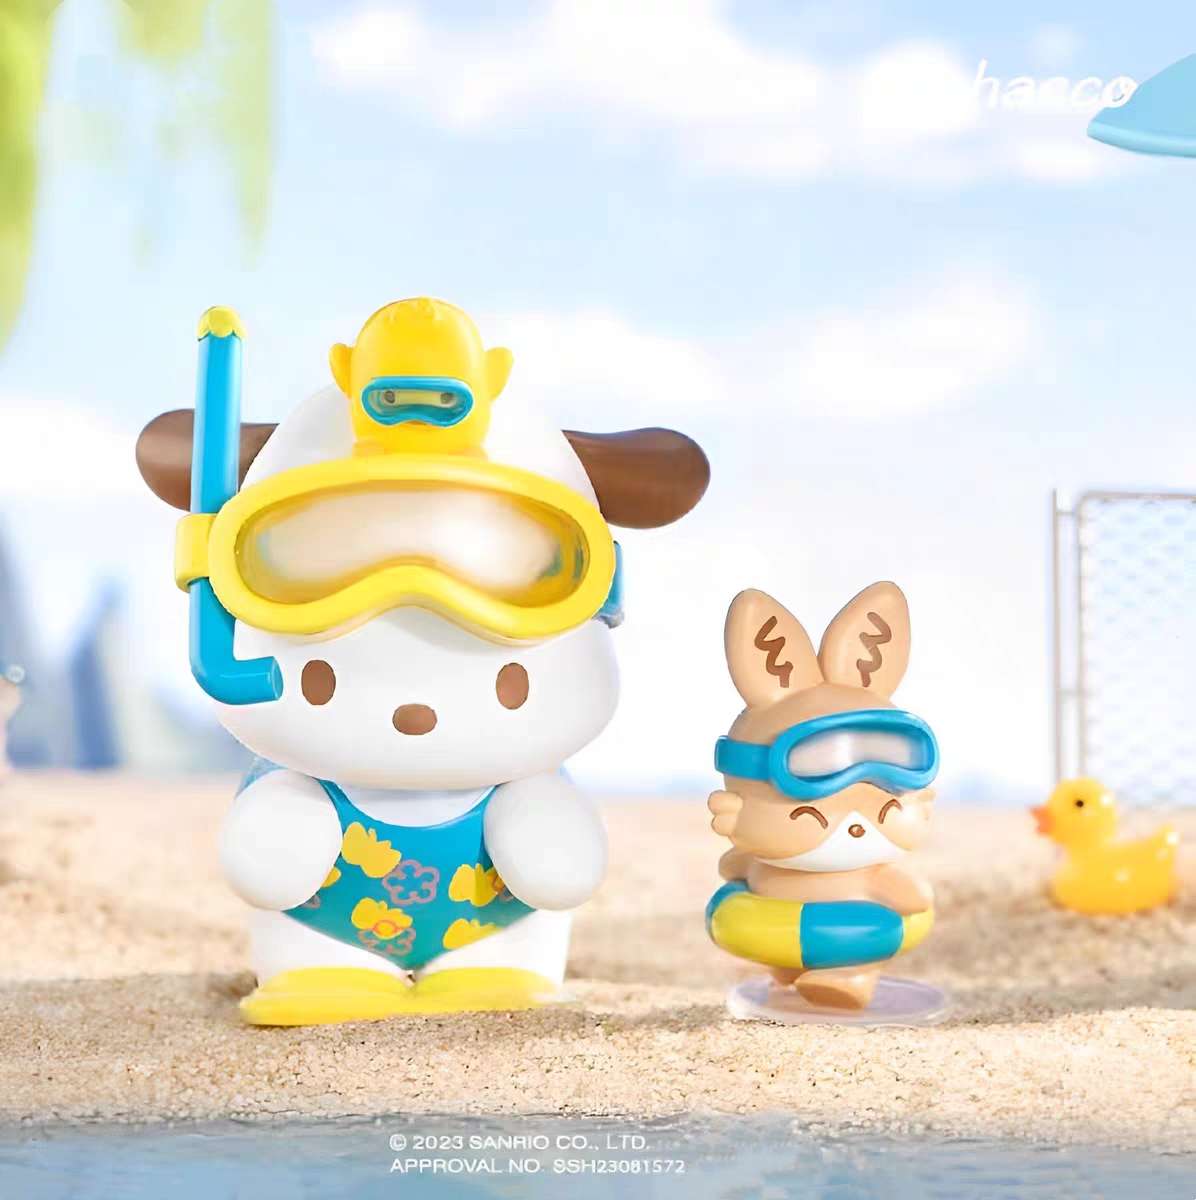 pochacco in swimming suit toy figures